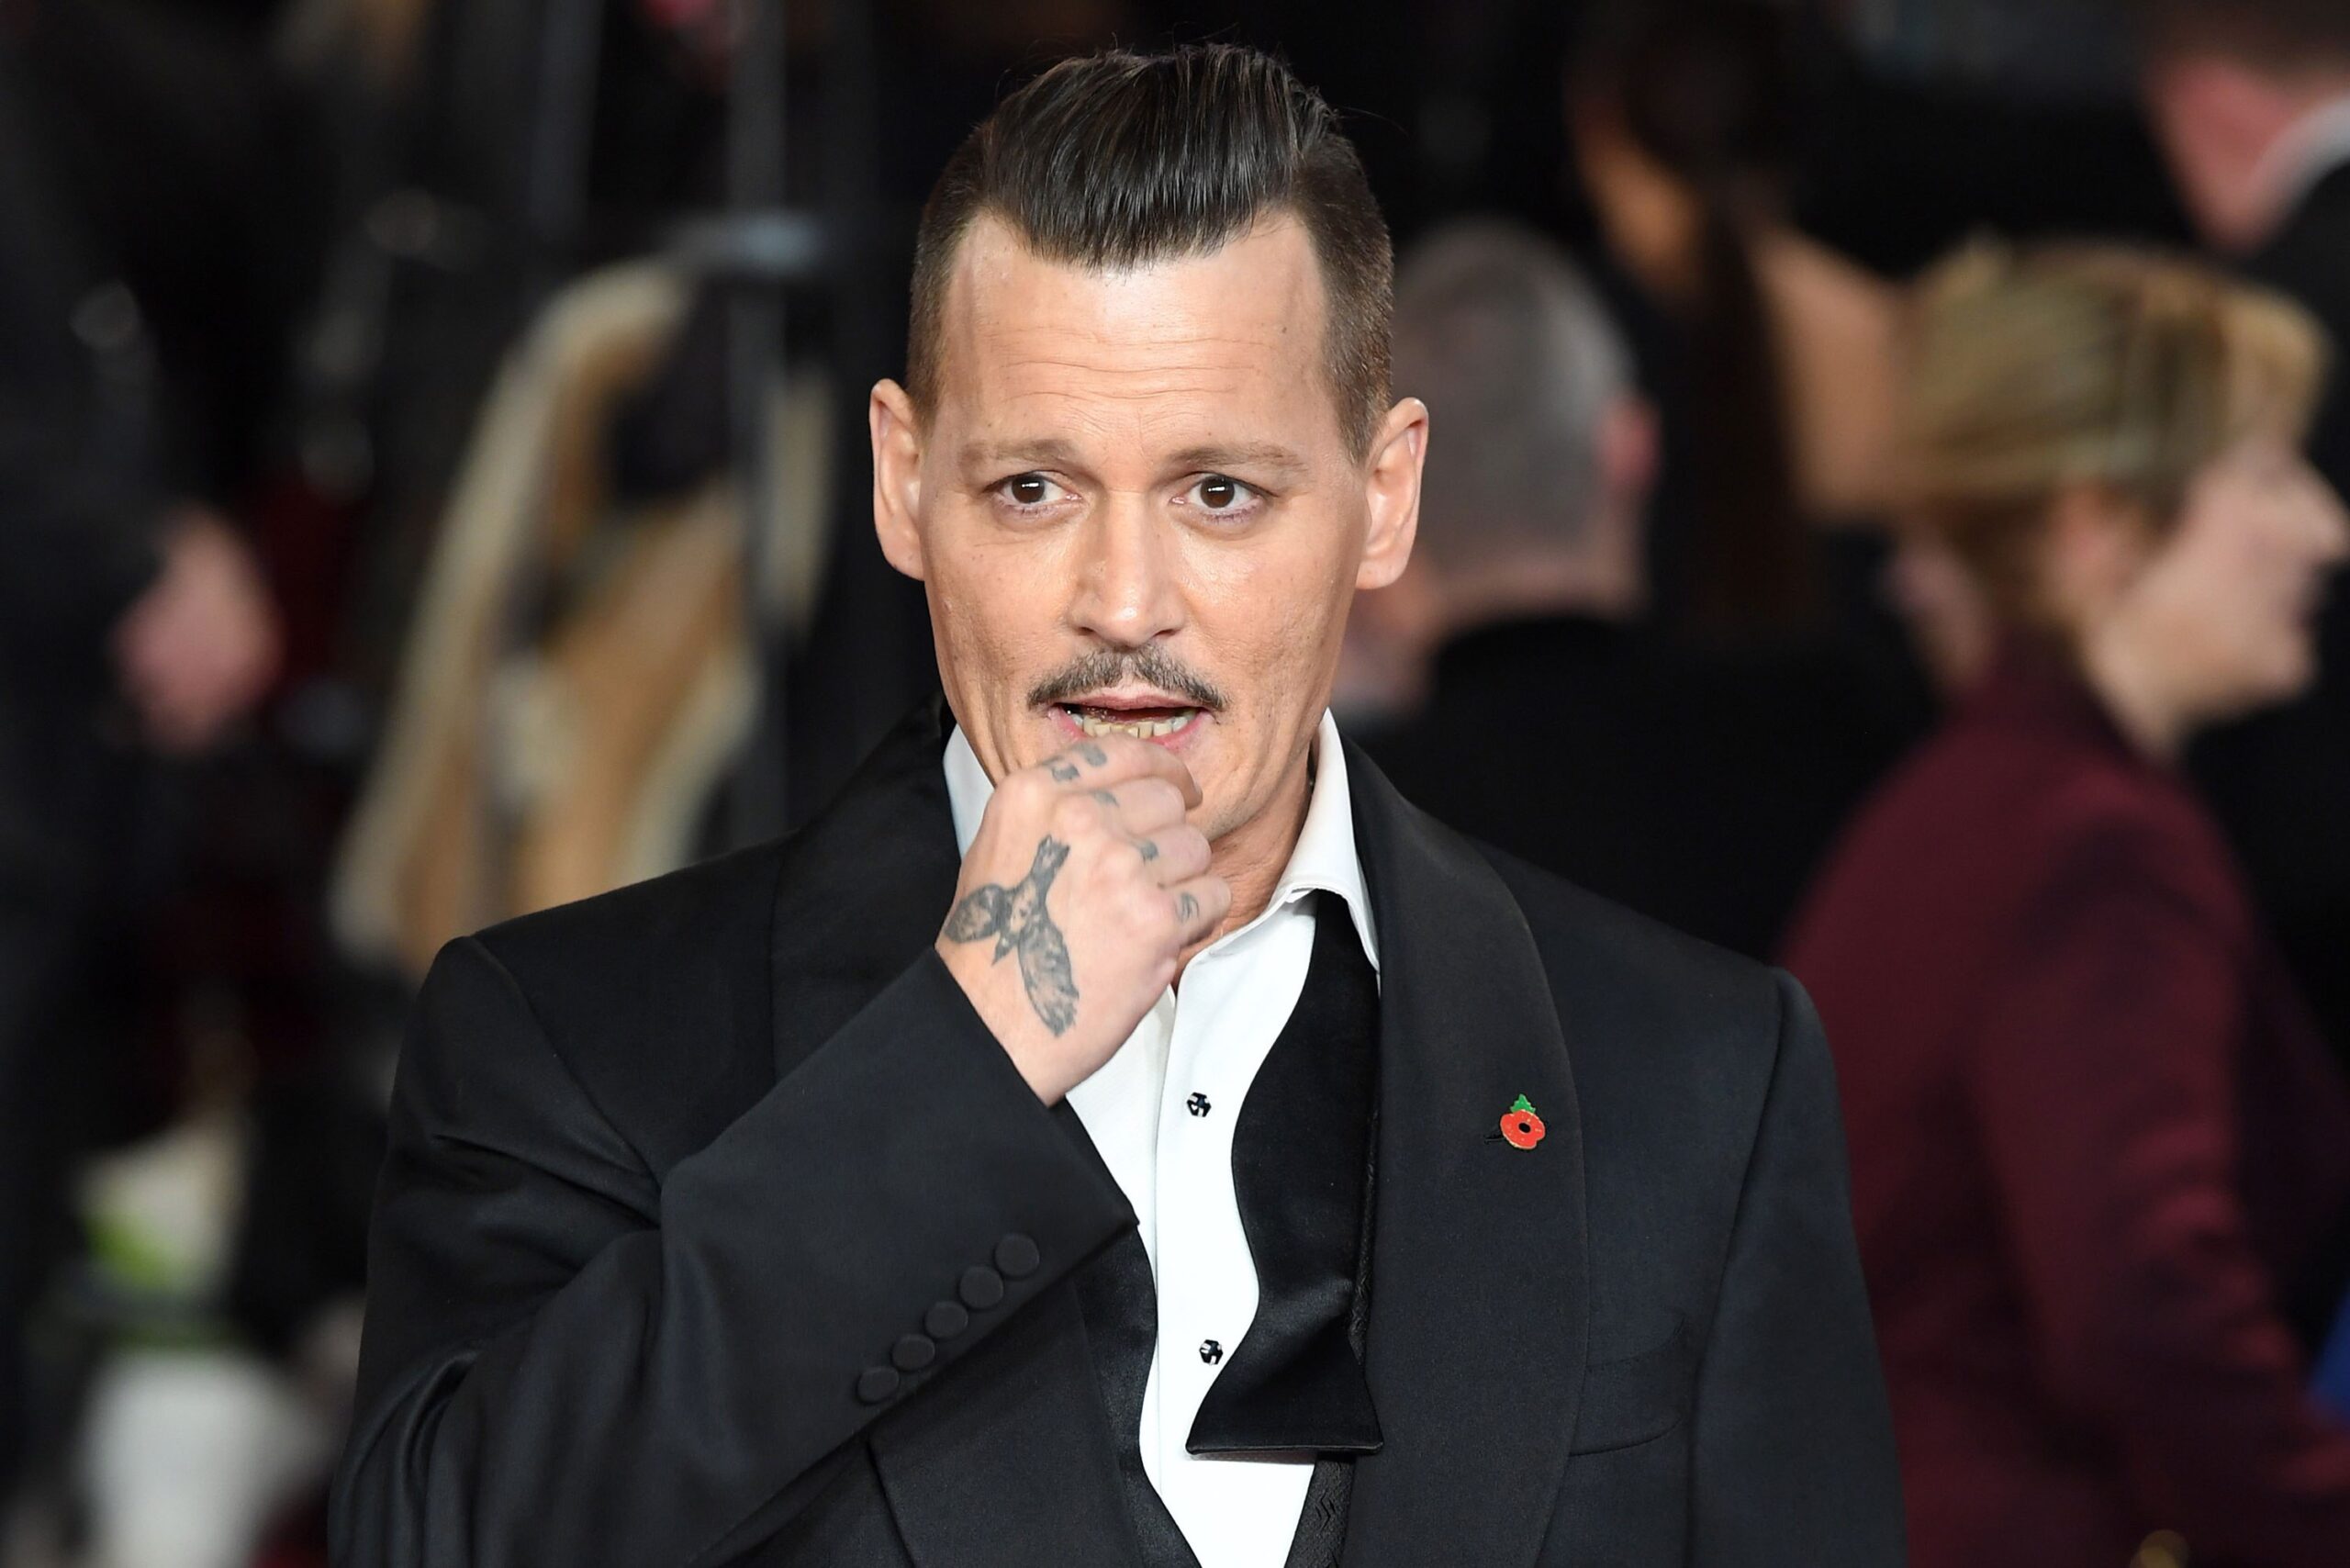 Johnny Depp's Notorious B.I.G Flick, 'City of Lies' Pulled From Schedule One Month Before Its Release